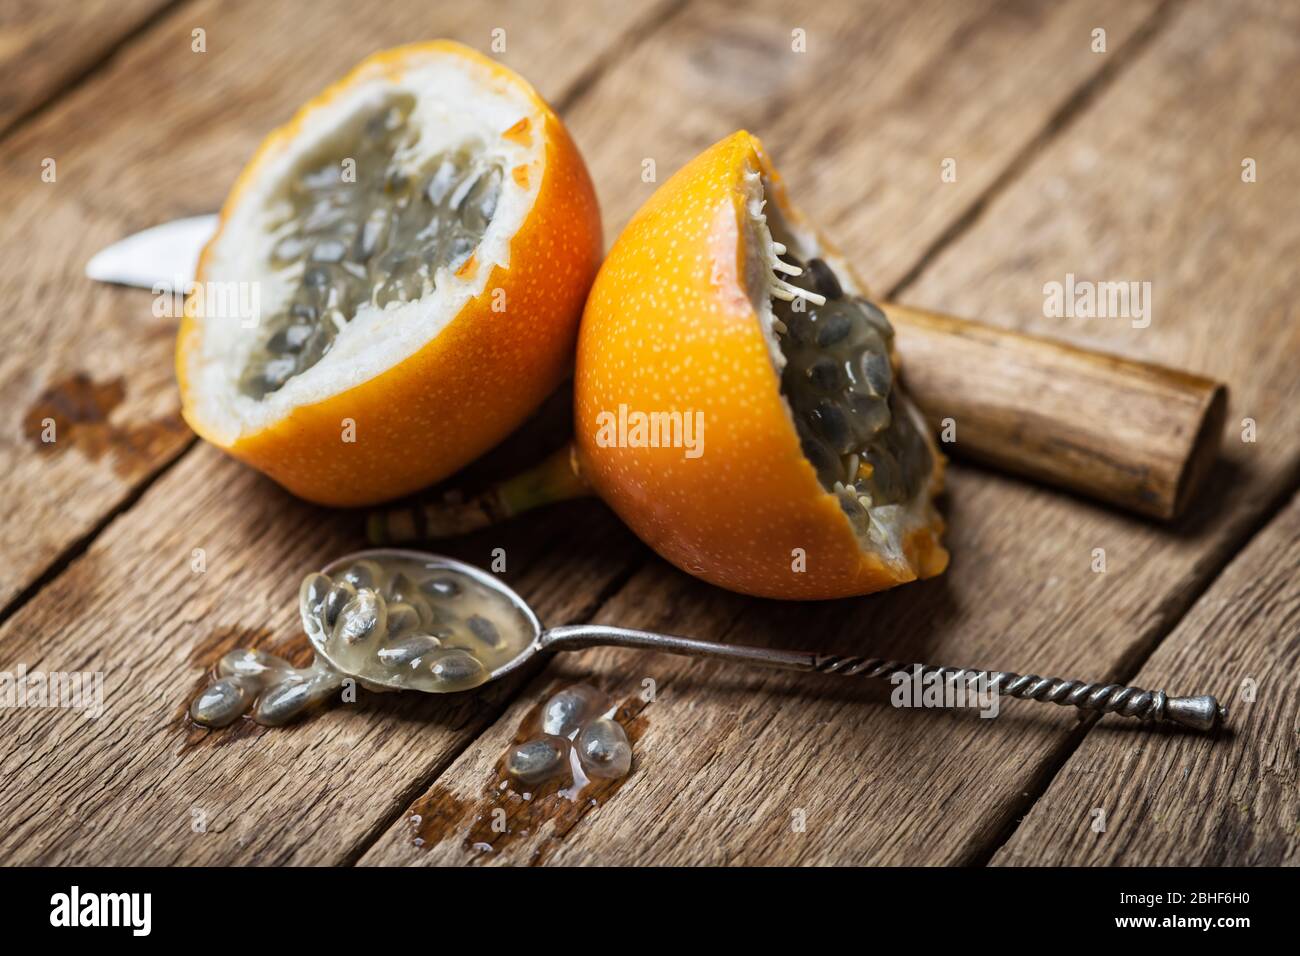 Slised passion fruit with knife and spoon on rusty wooden background. Food photography Stock Photo